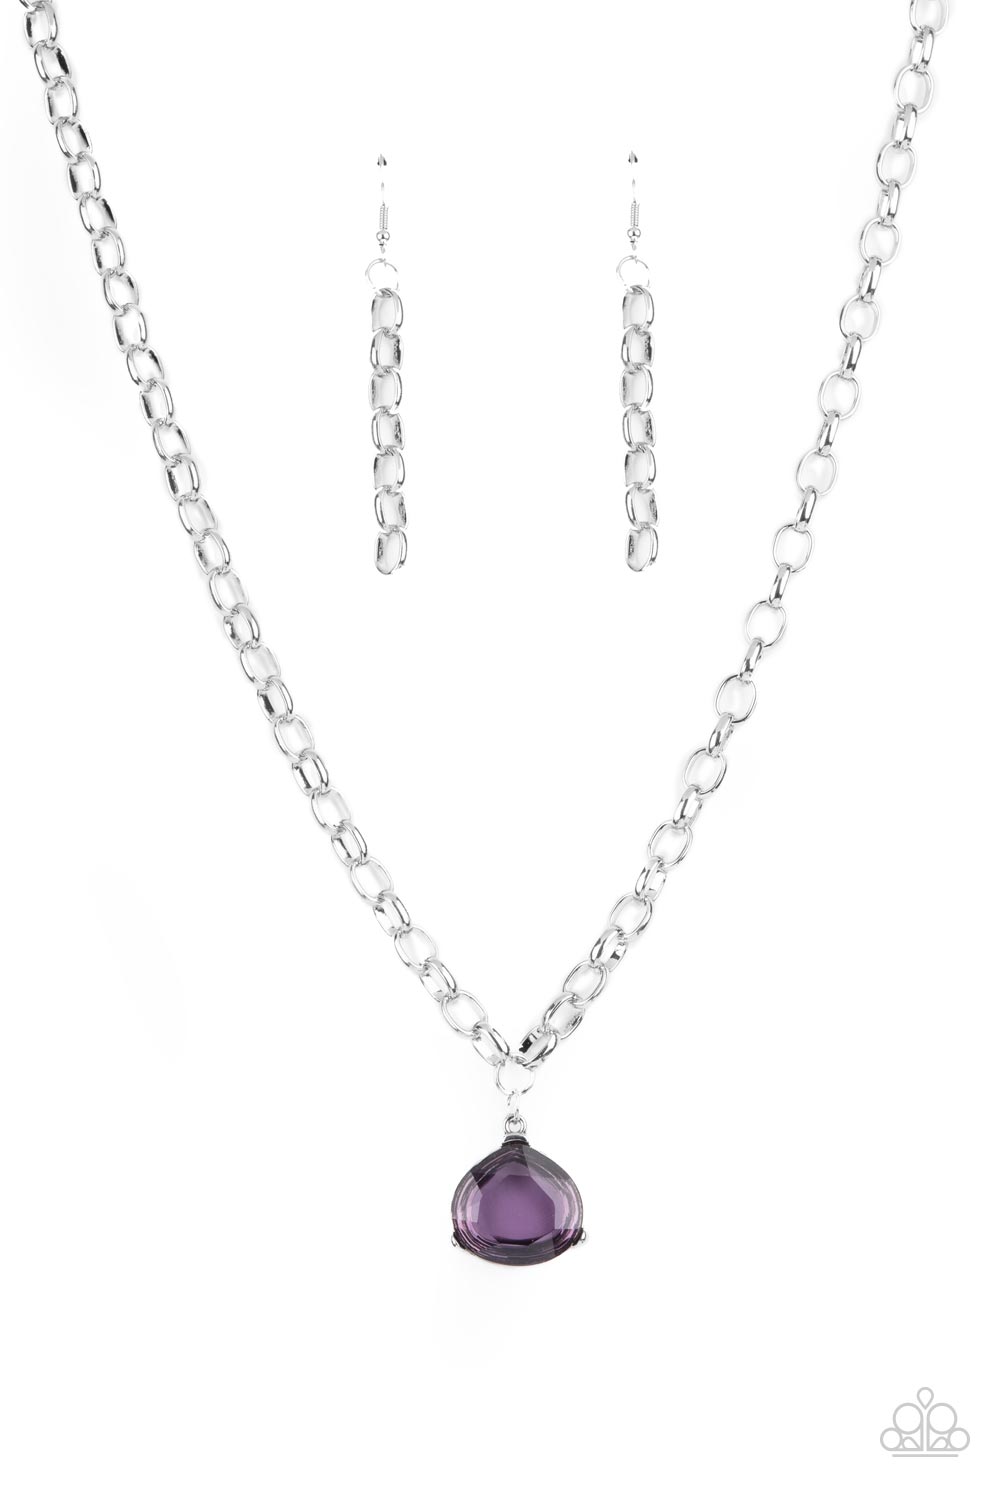 Gallery Gem - Purple ***COMING SOON*** - Bling With Crystal